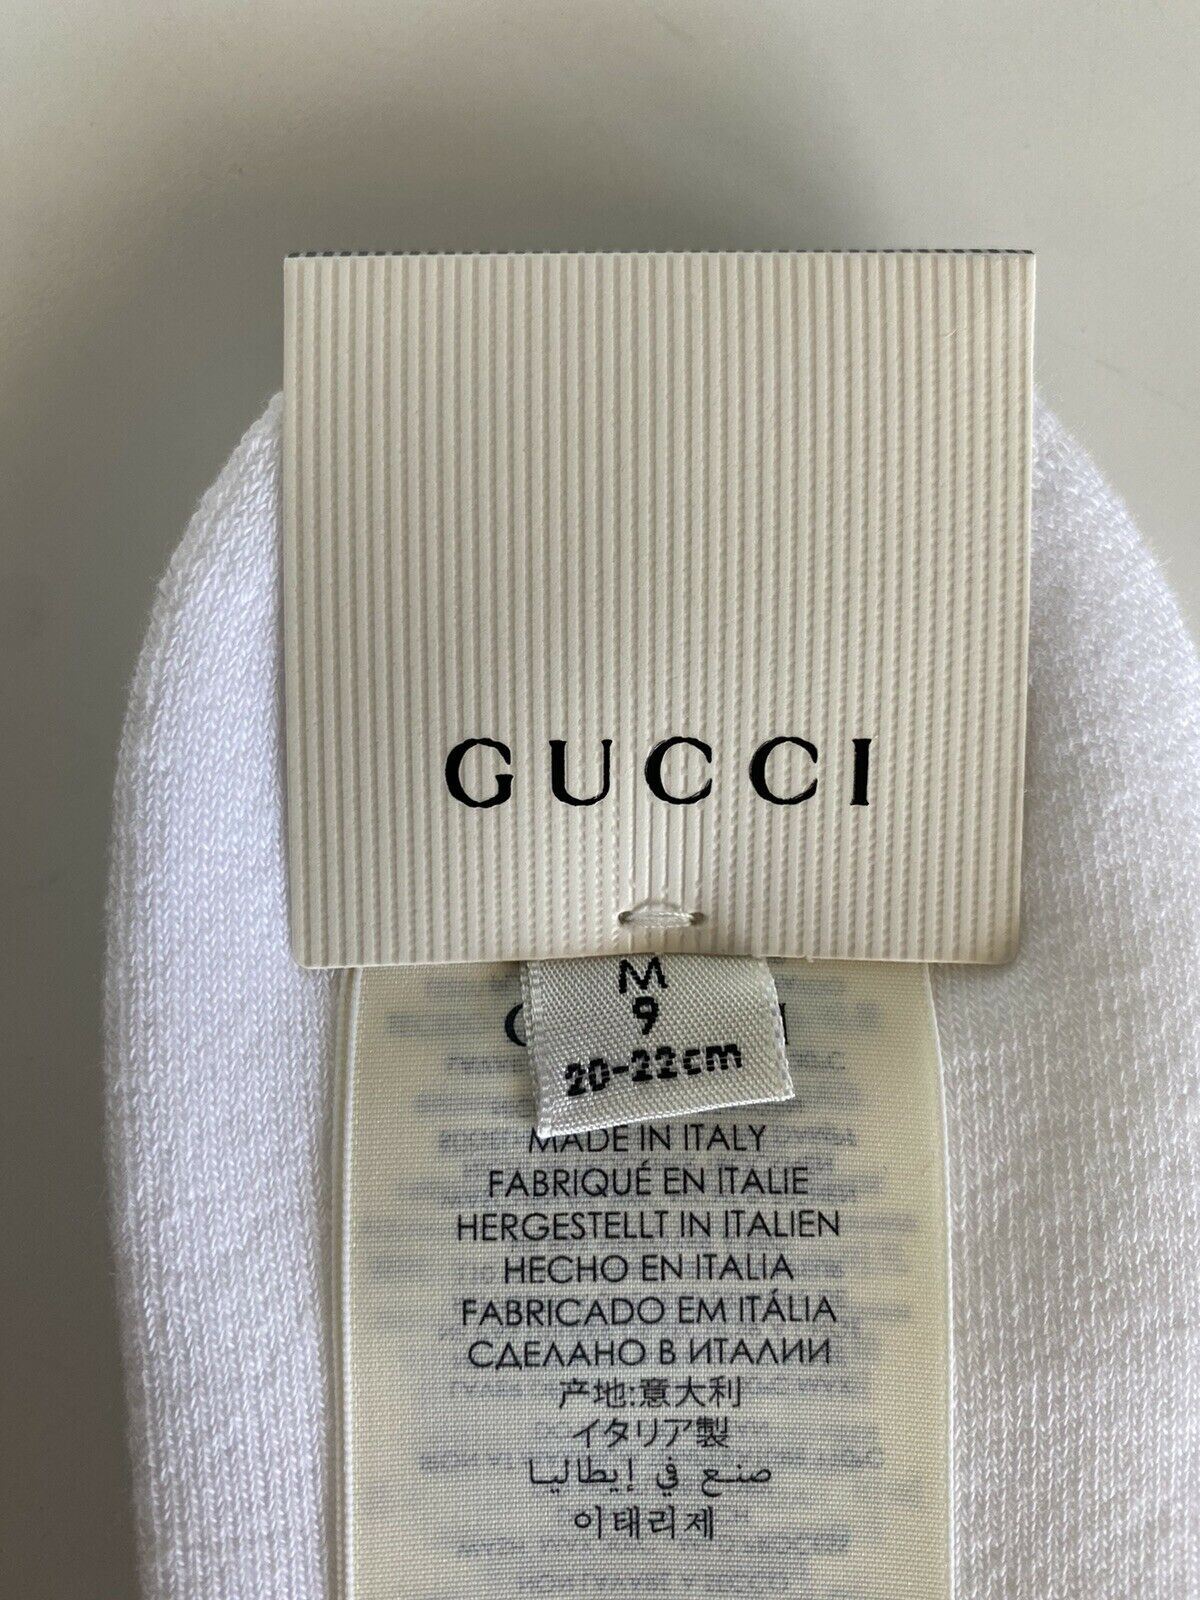 NWT Gucci Shiny Pong White/Green Socks M (20-22 cm) Made in Italy 579316